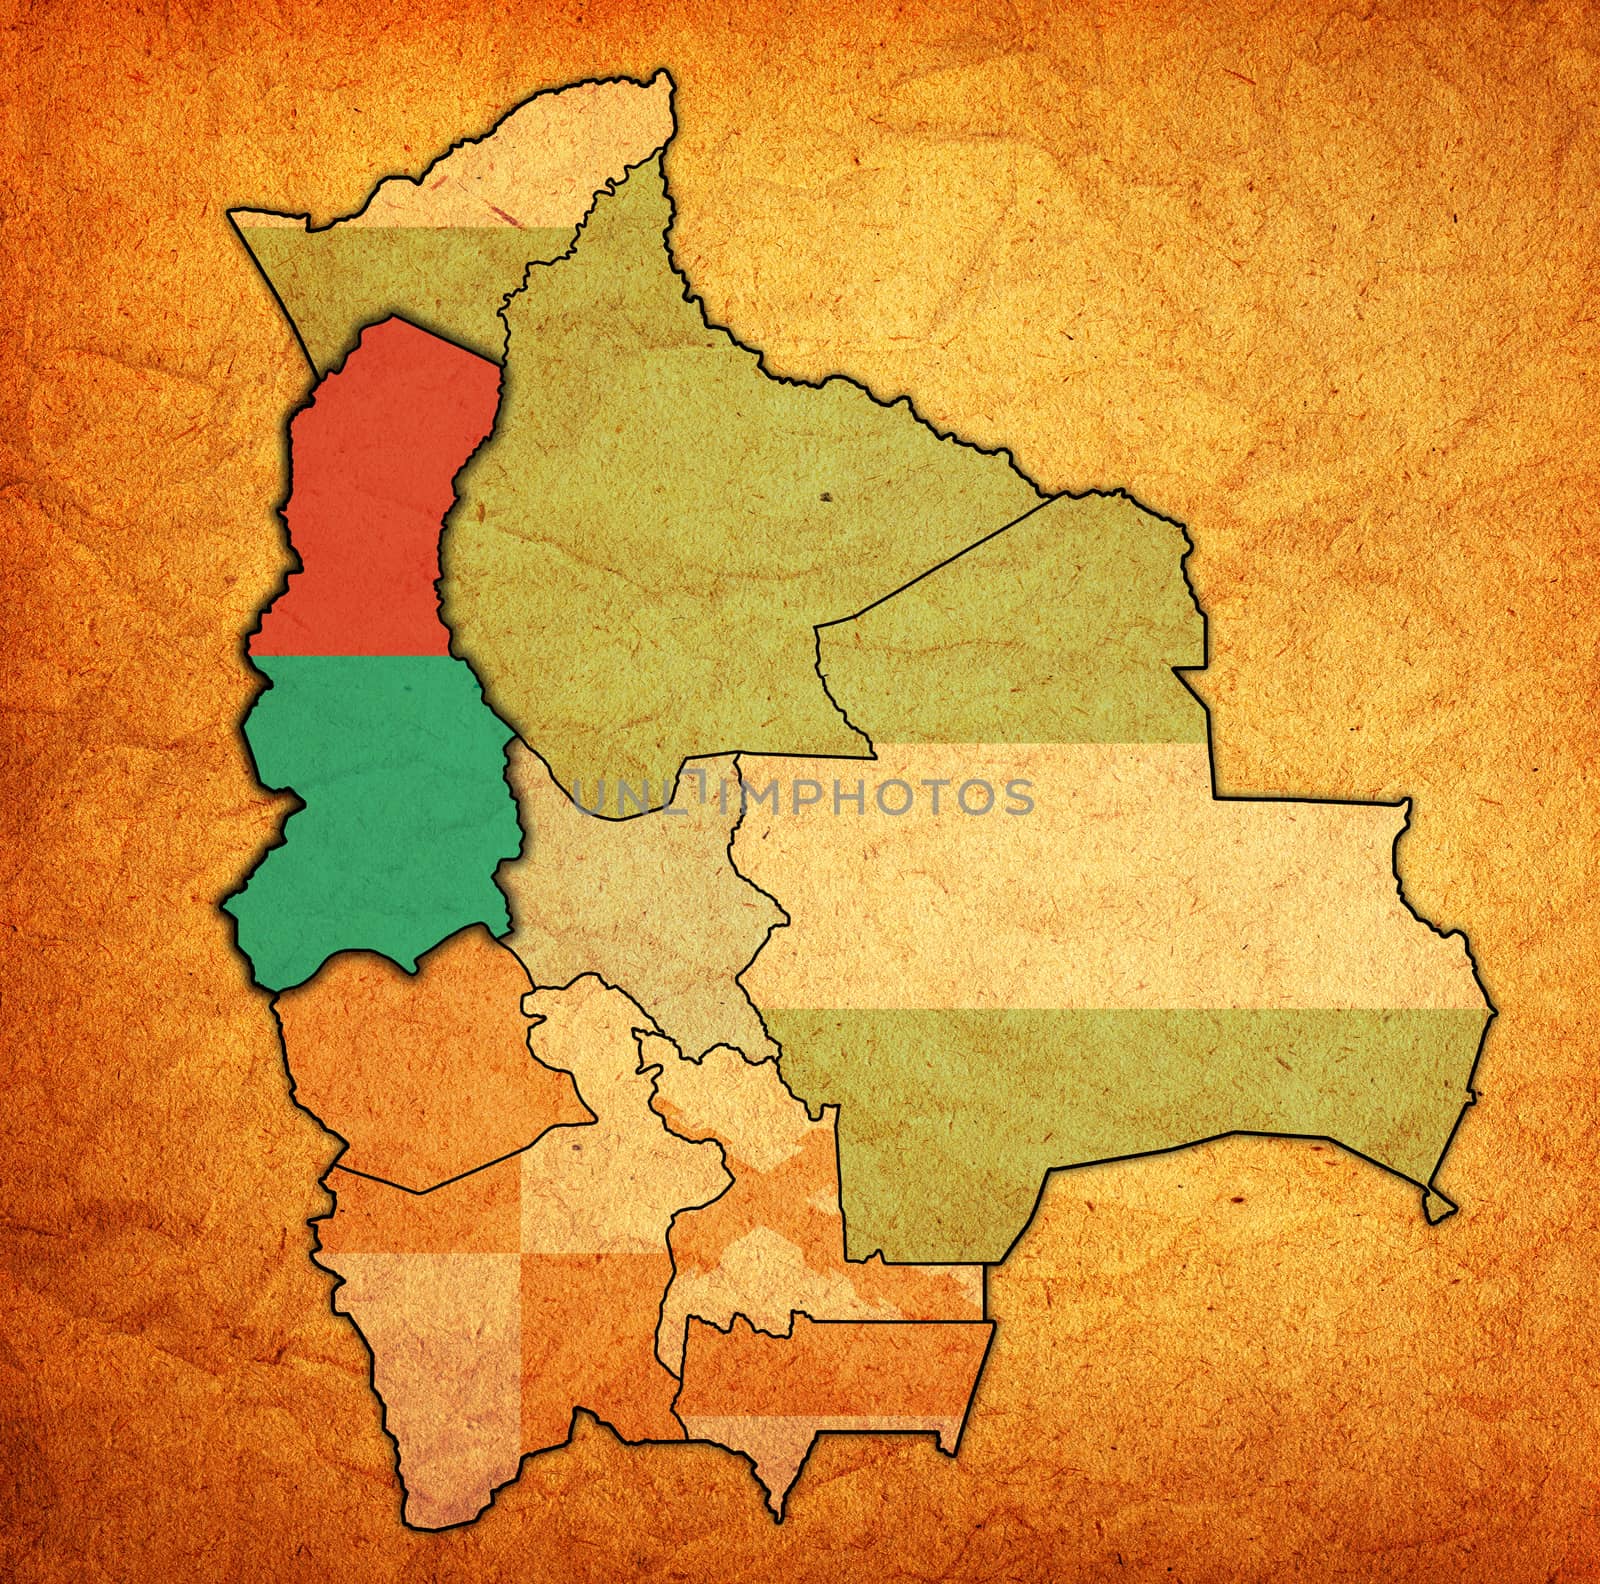 territory of La Paz region on administration map of Bolivia by michal812